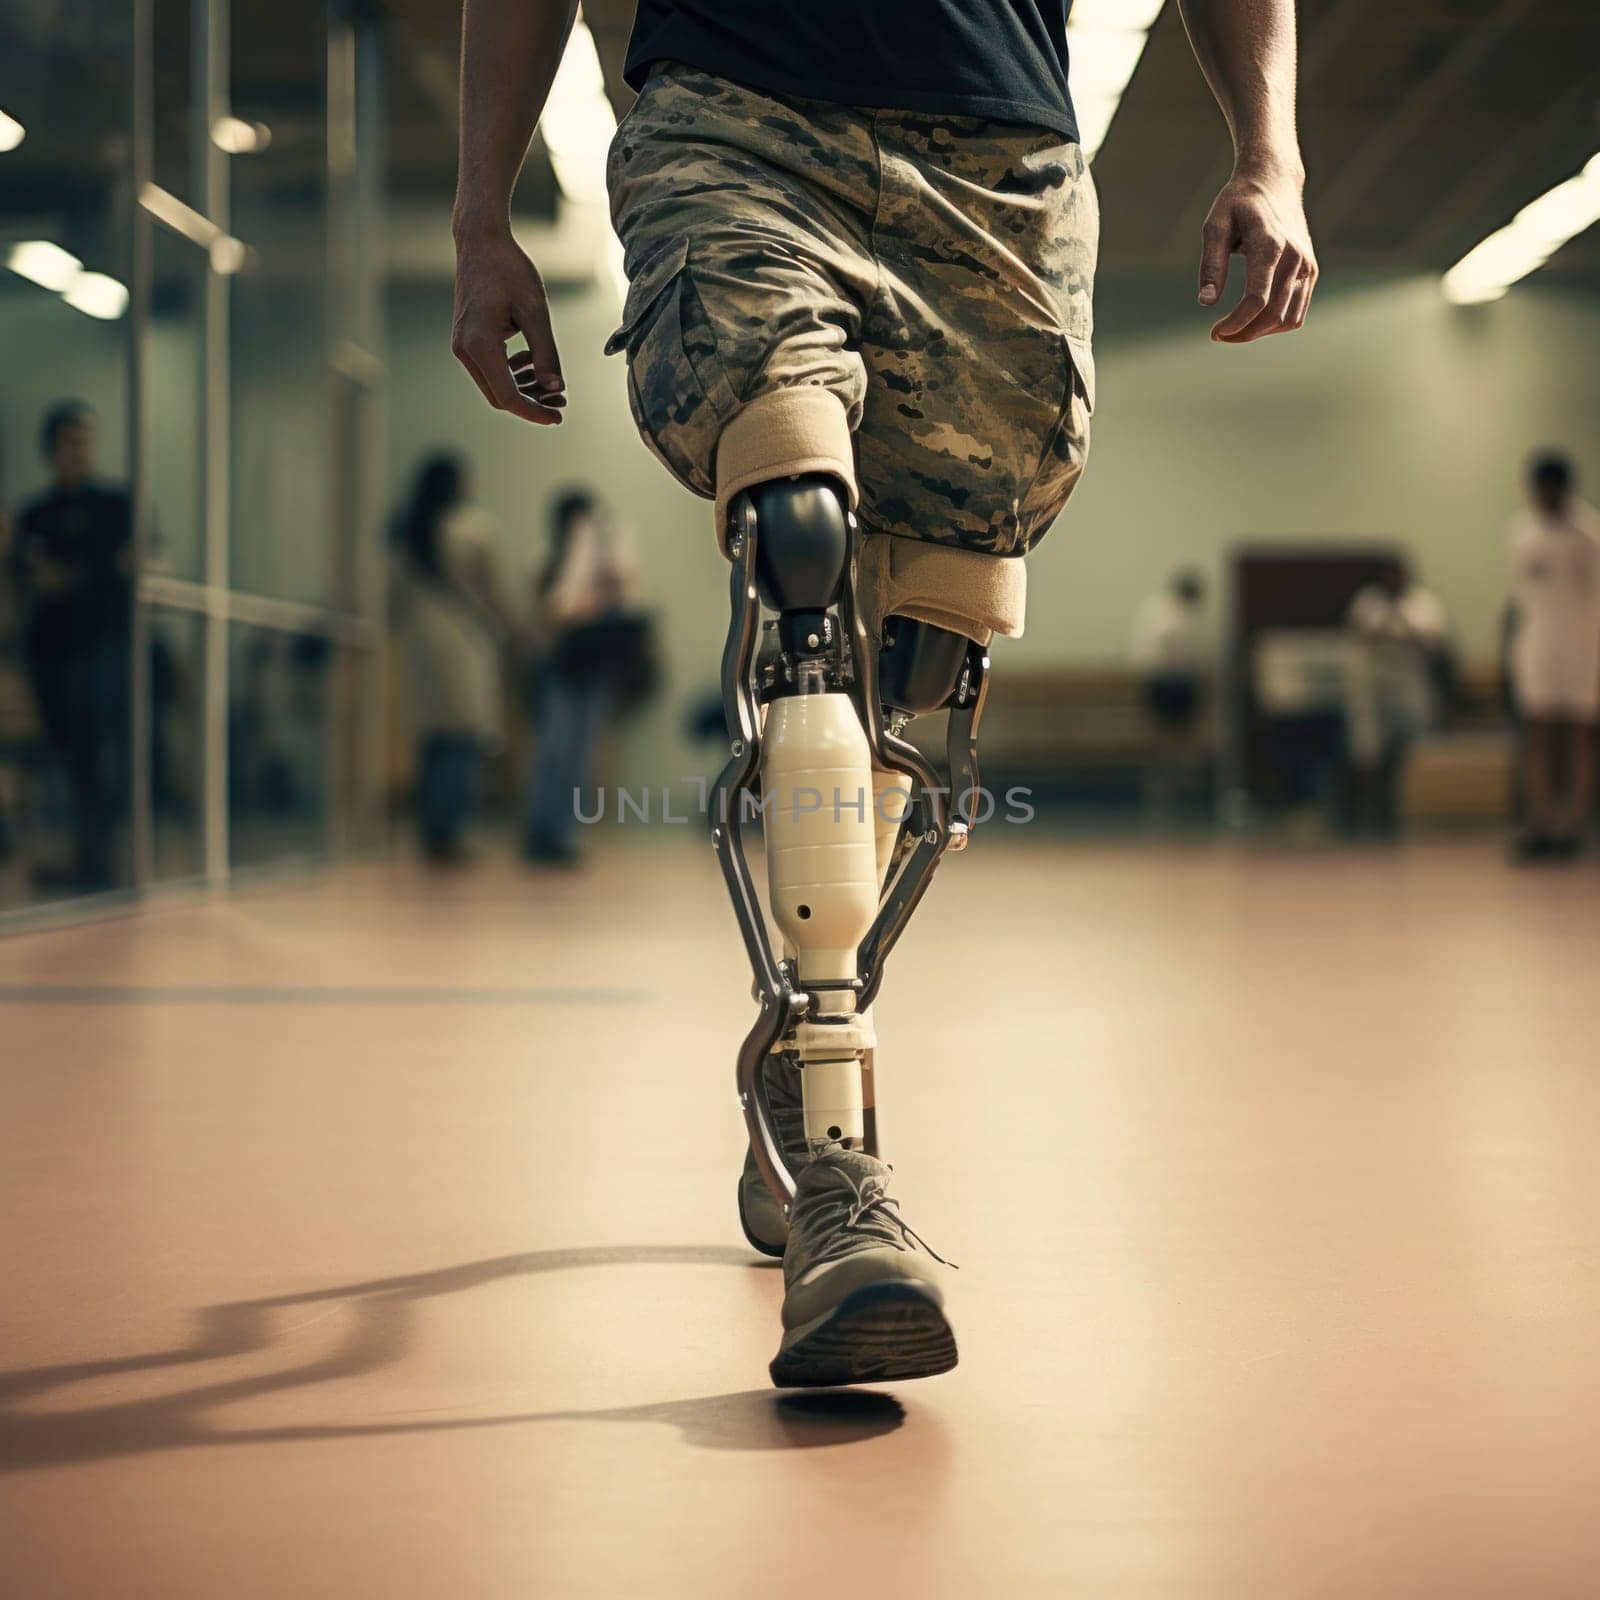 An inspiring image of a man with prosthetic legs, demonstrating the life-changing experience of modern medical solutions and support technologies.